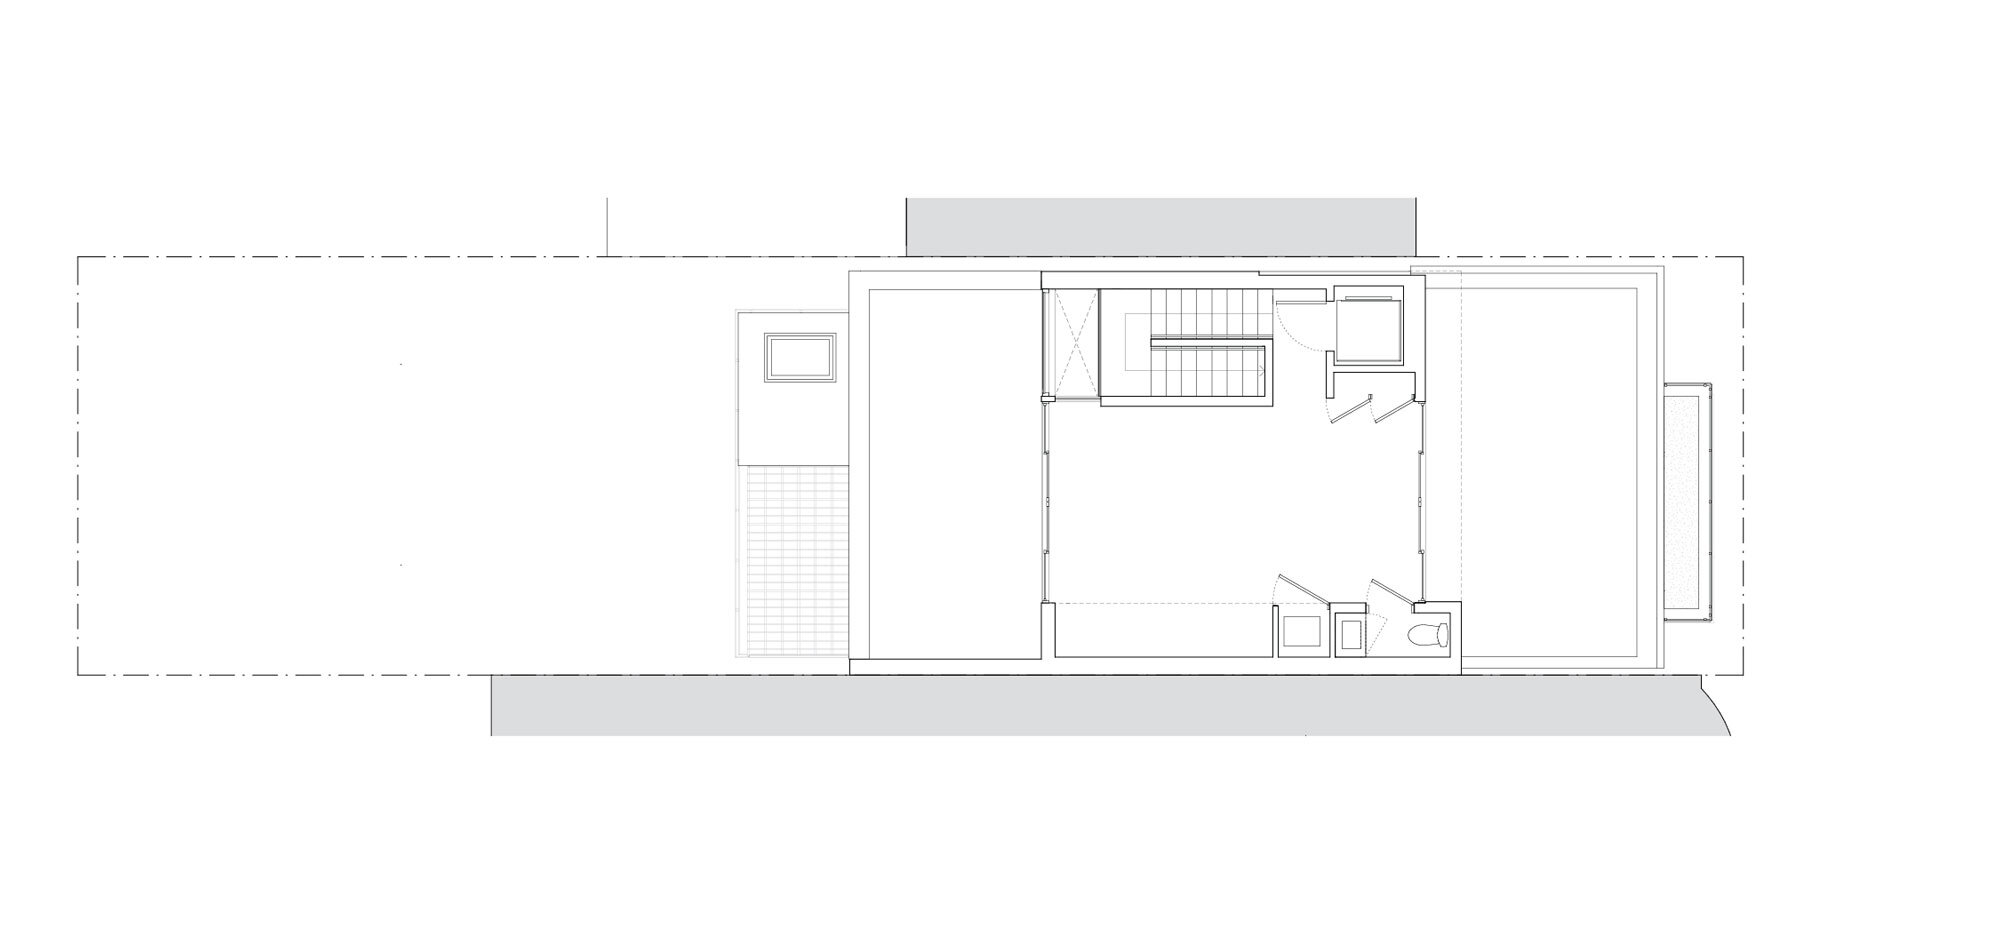 05-res4-re4a-resolution-4-architecture-park-slope-townhouse-brooklyn-modern-home-floor-plan.jpg